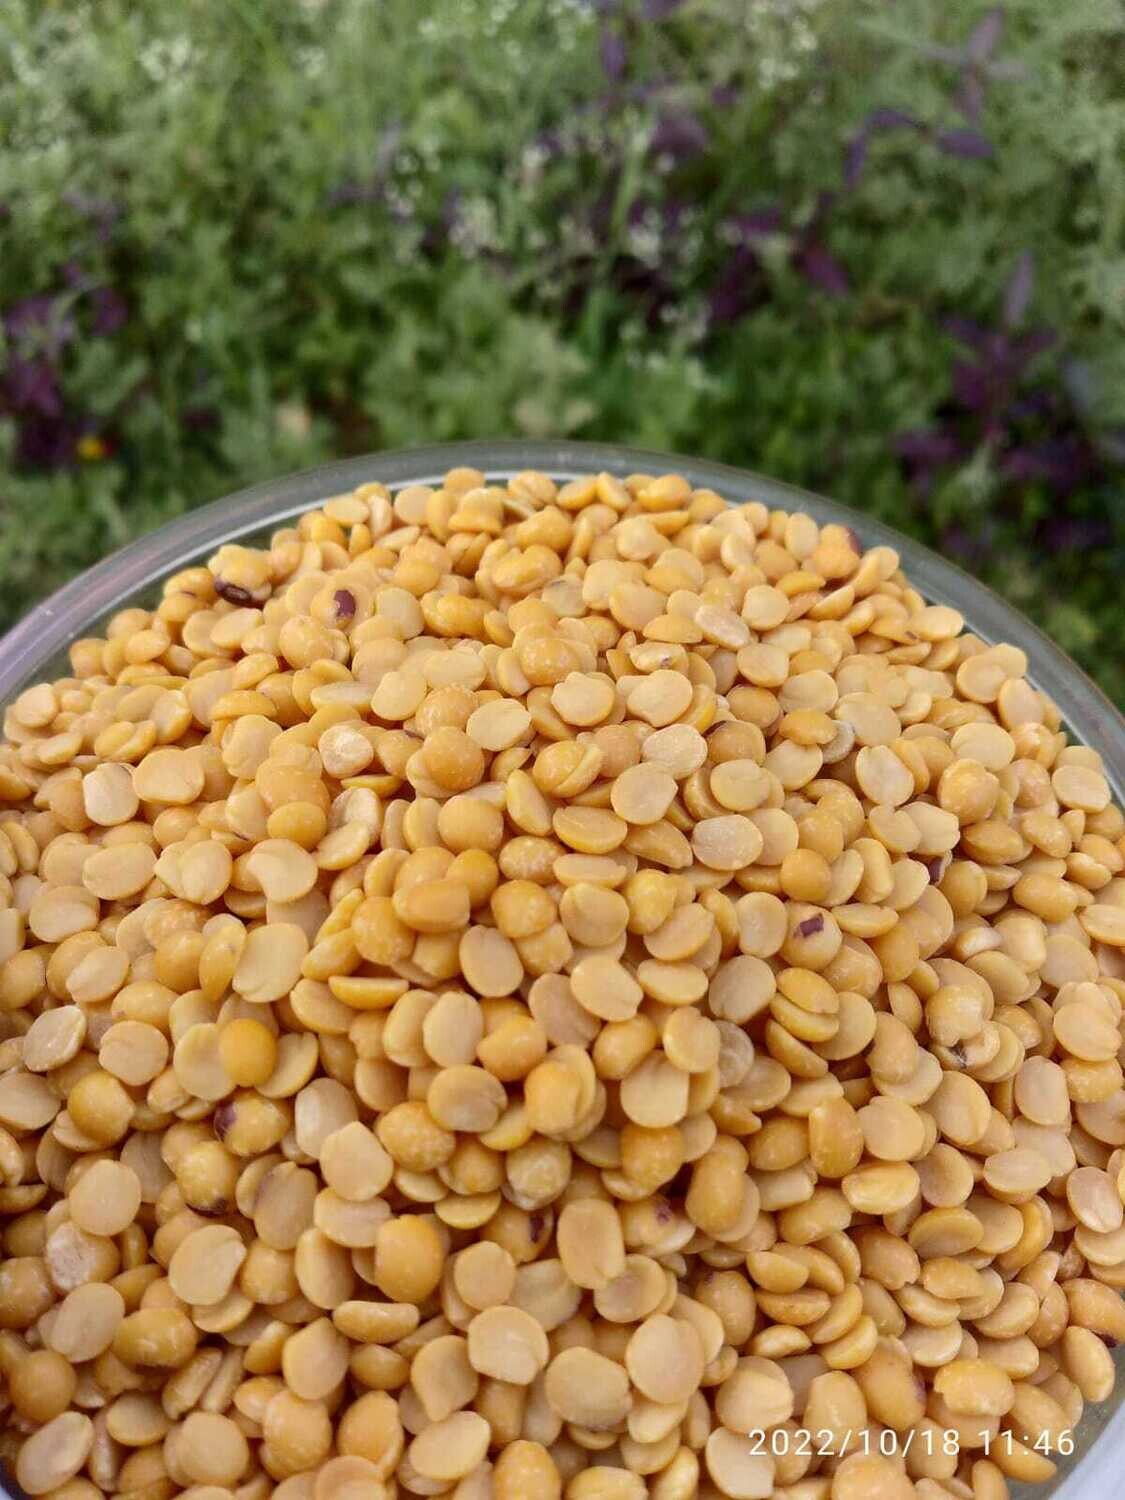 Toor Dal (ತೊಗರಿ ಬೇಳೆ) Unpolished